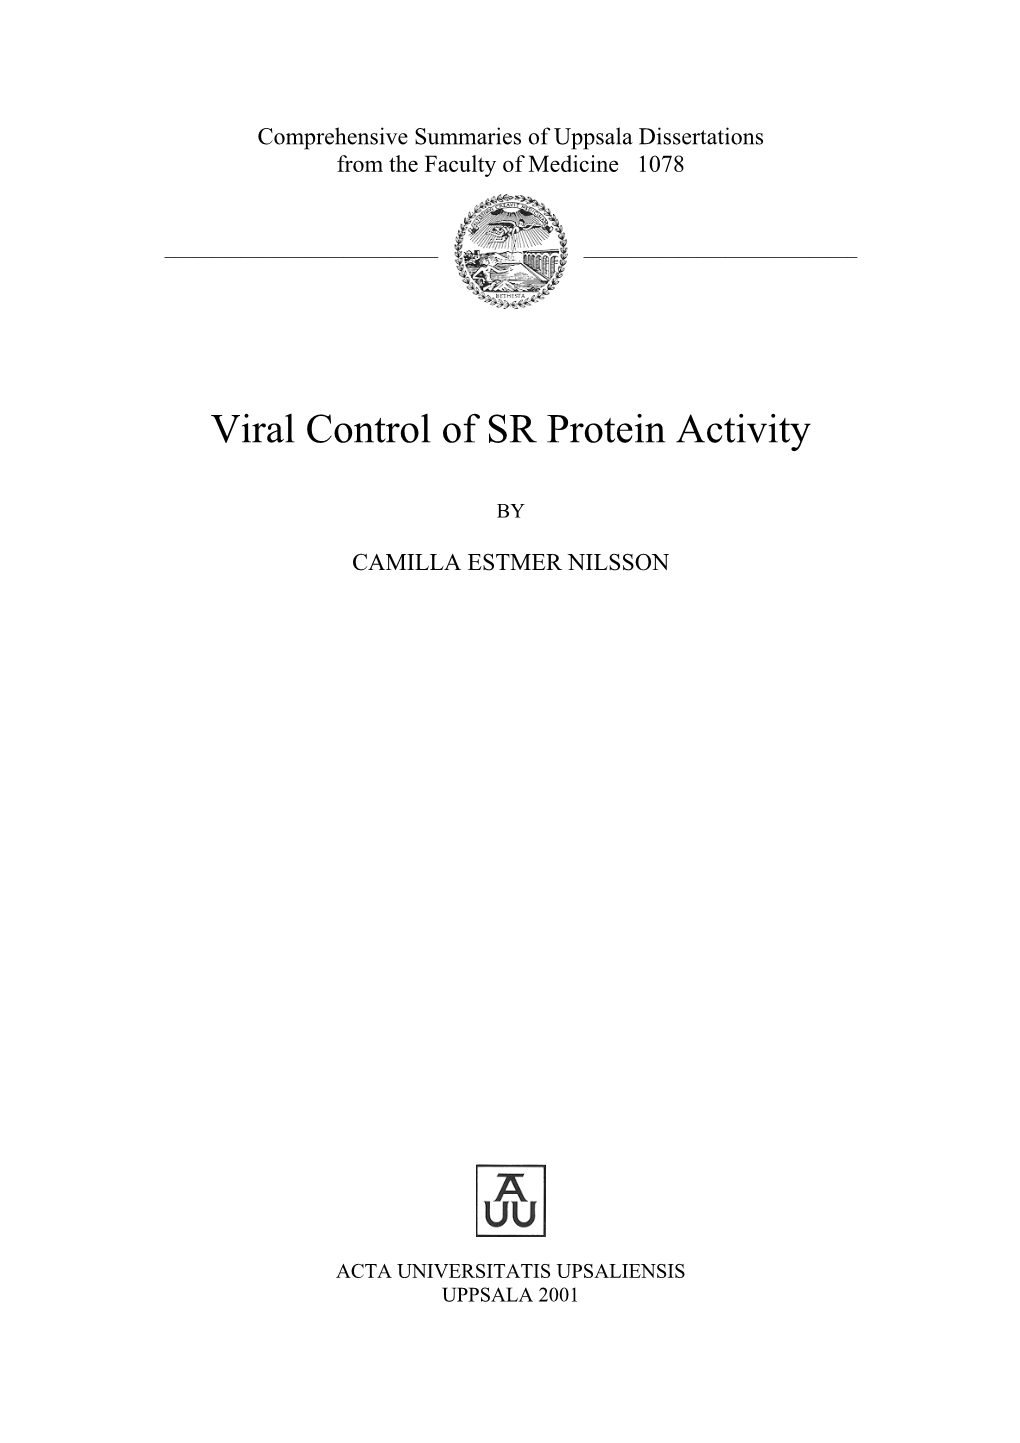 Viral Control of SR Protein Activity